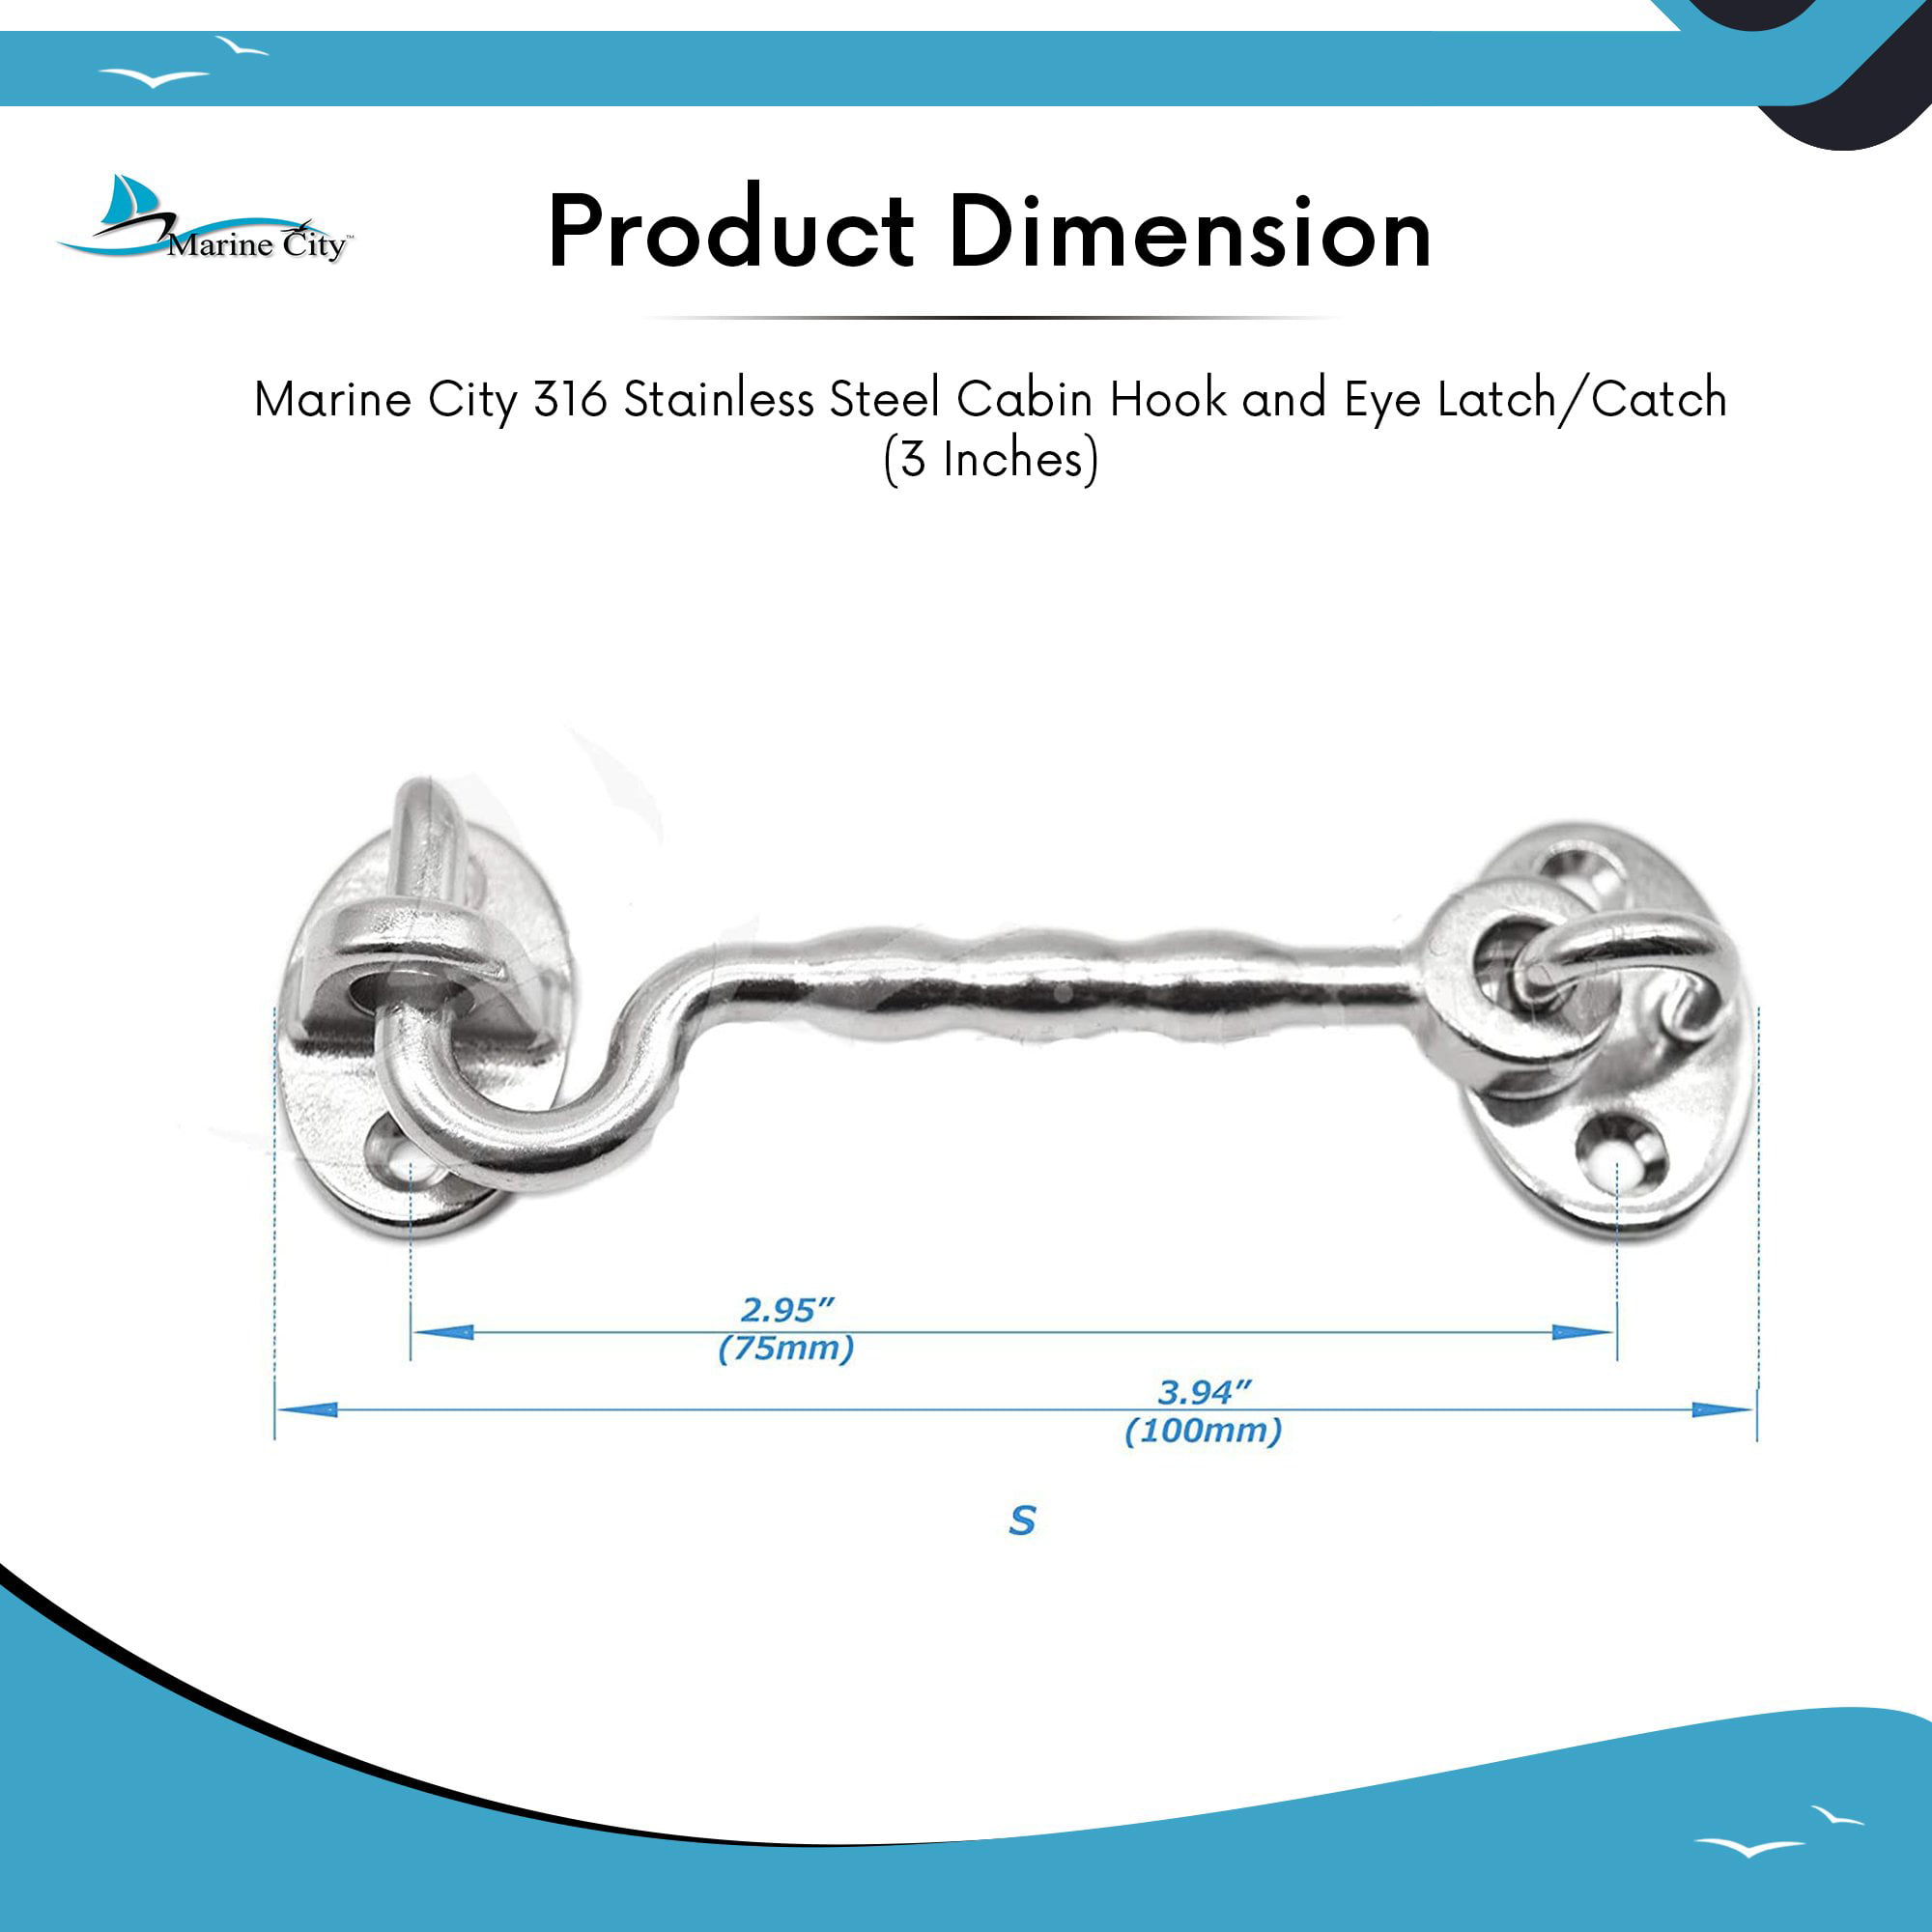 Marine City 316 Stainless-Steel Cabin Hook and Eye Latch/Catch 3